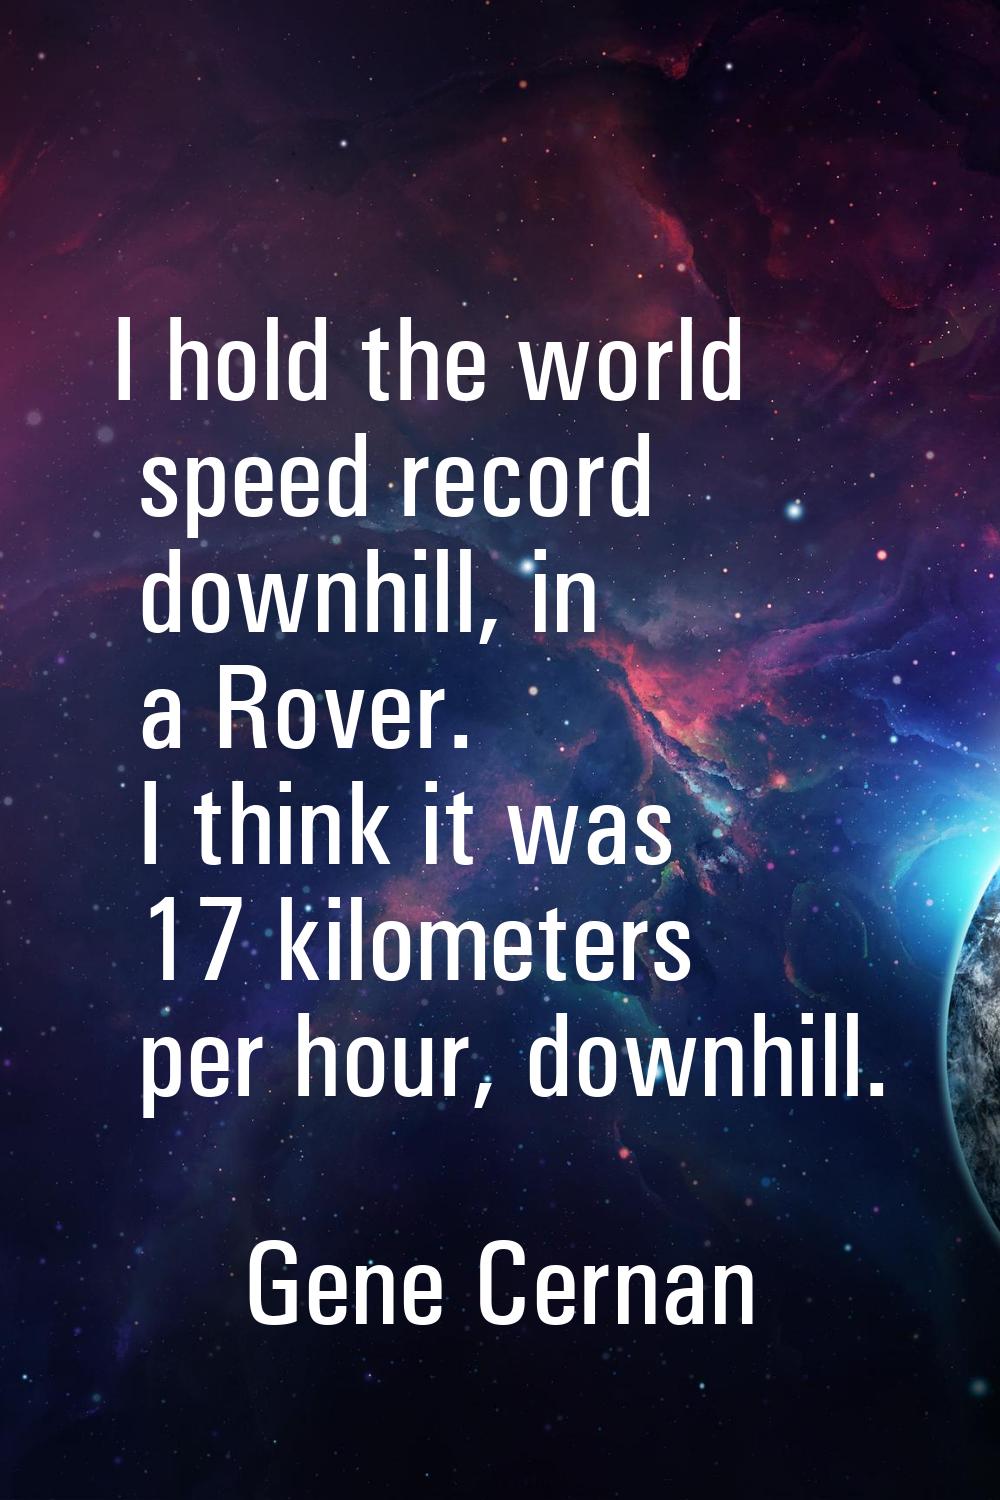 I hold the world speed record downhill, in a Rover. I think it was 17 kilometers per hour, downhill